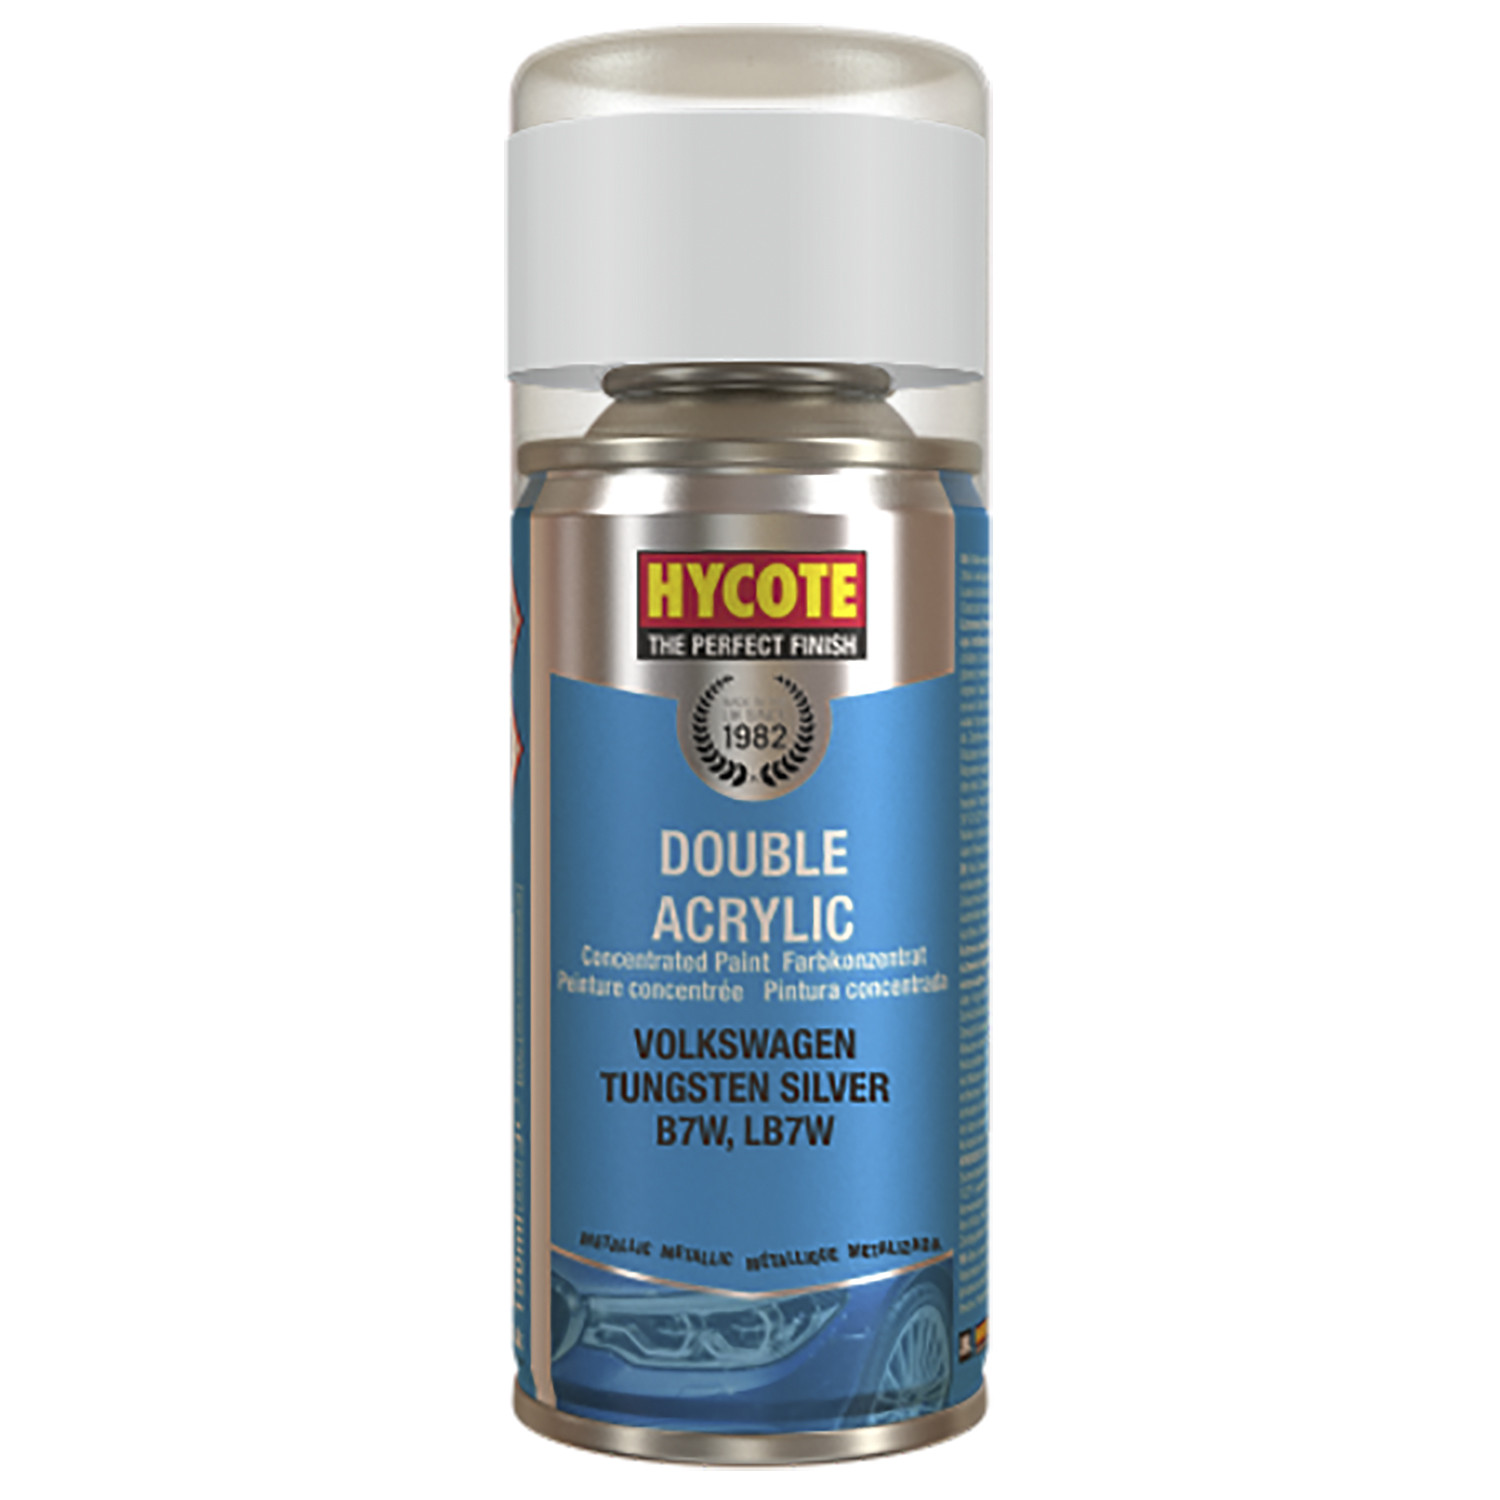 Hycote Volkswagon Double Acrylic Pain - Opelvaux Royal Blue Image